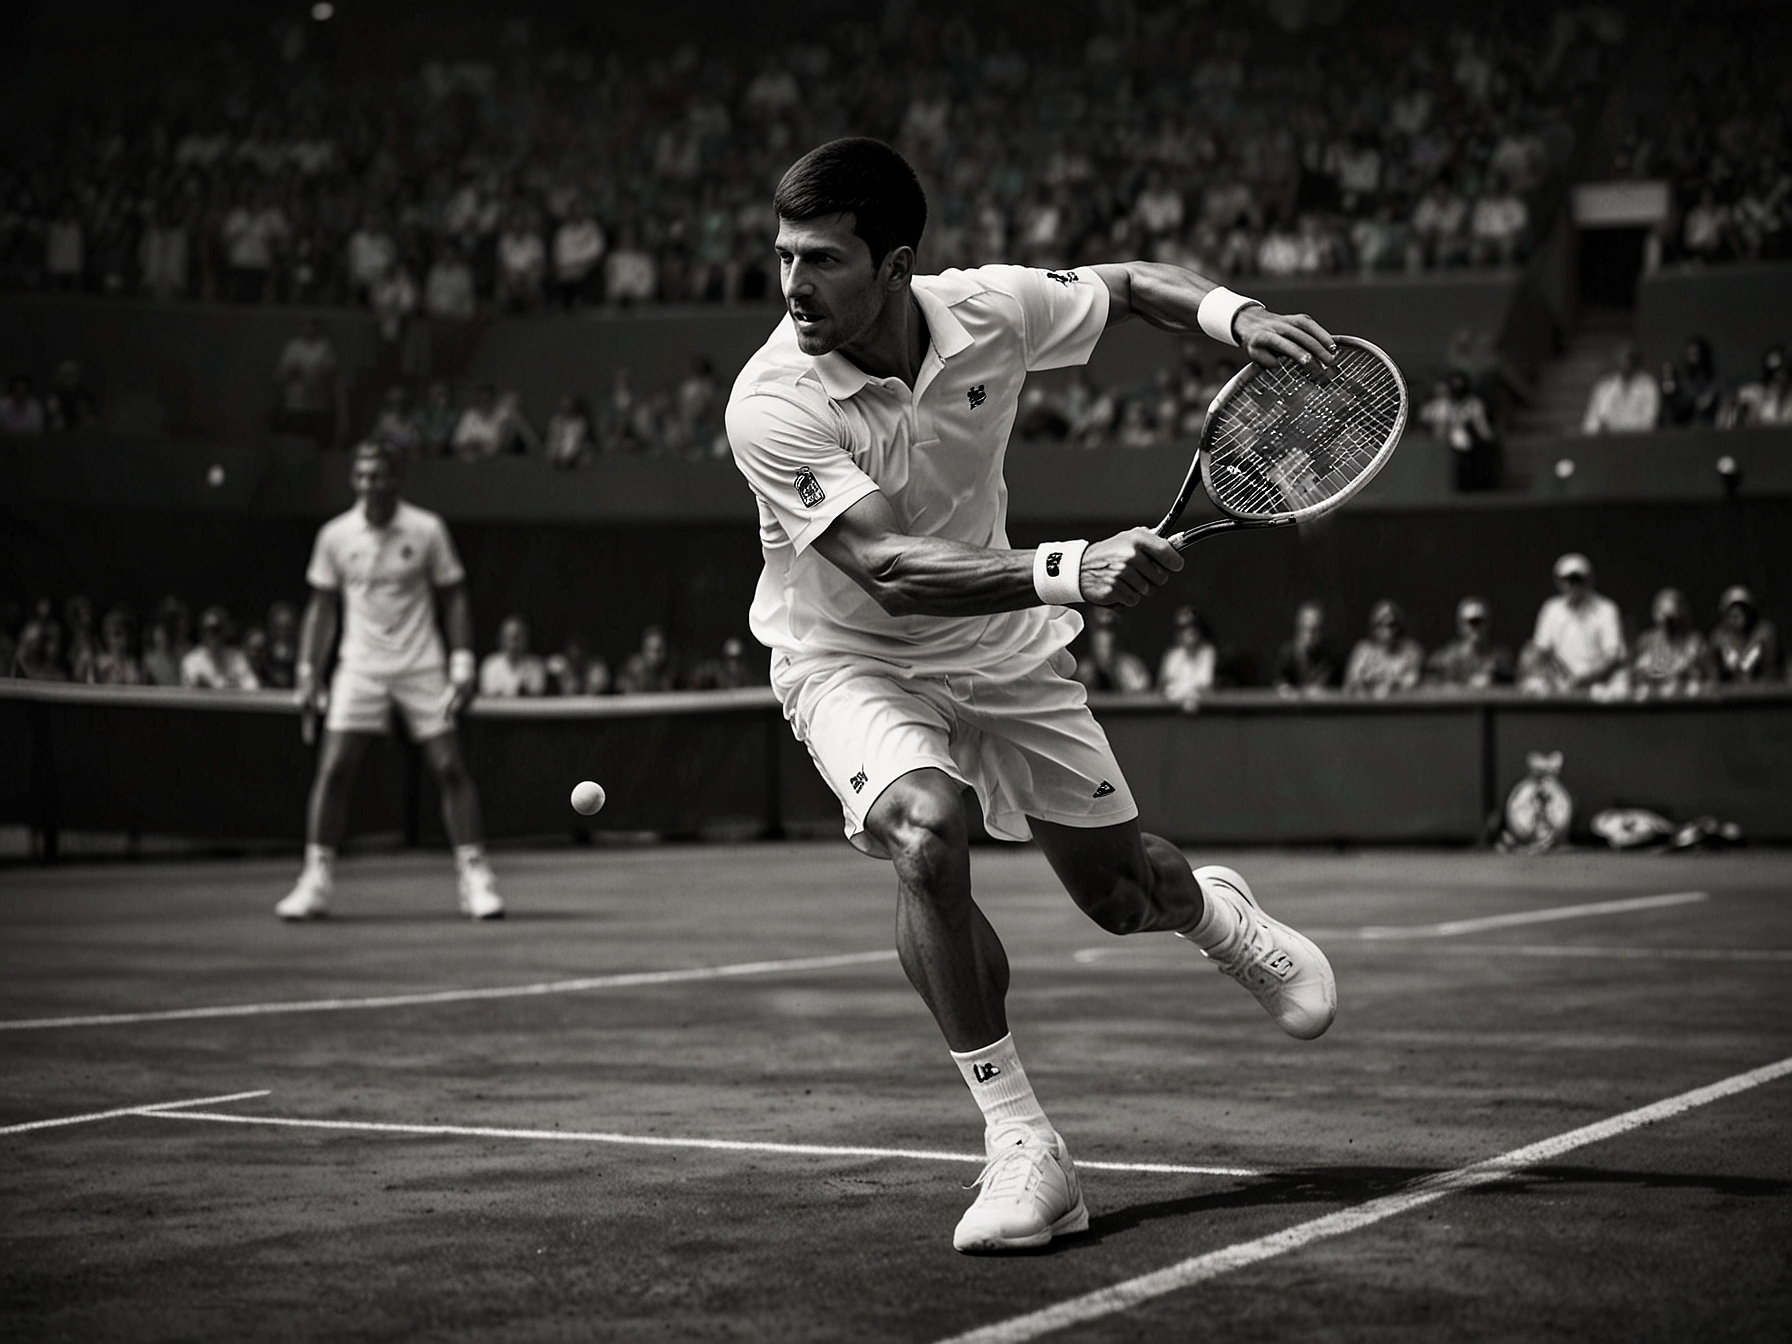 Djokovic is seen practicing on a tennis court, engaging in drills and precision shots, highlighting his unwavering determination to regain top form and compete in Wimbledon.